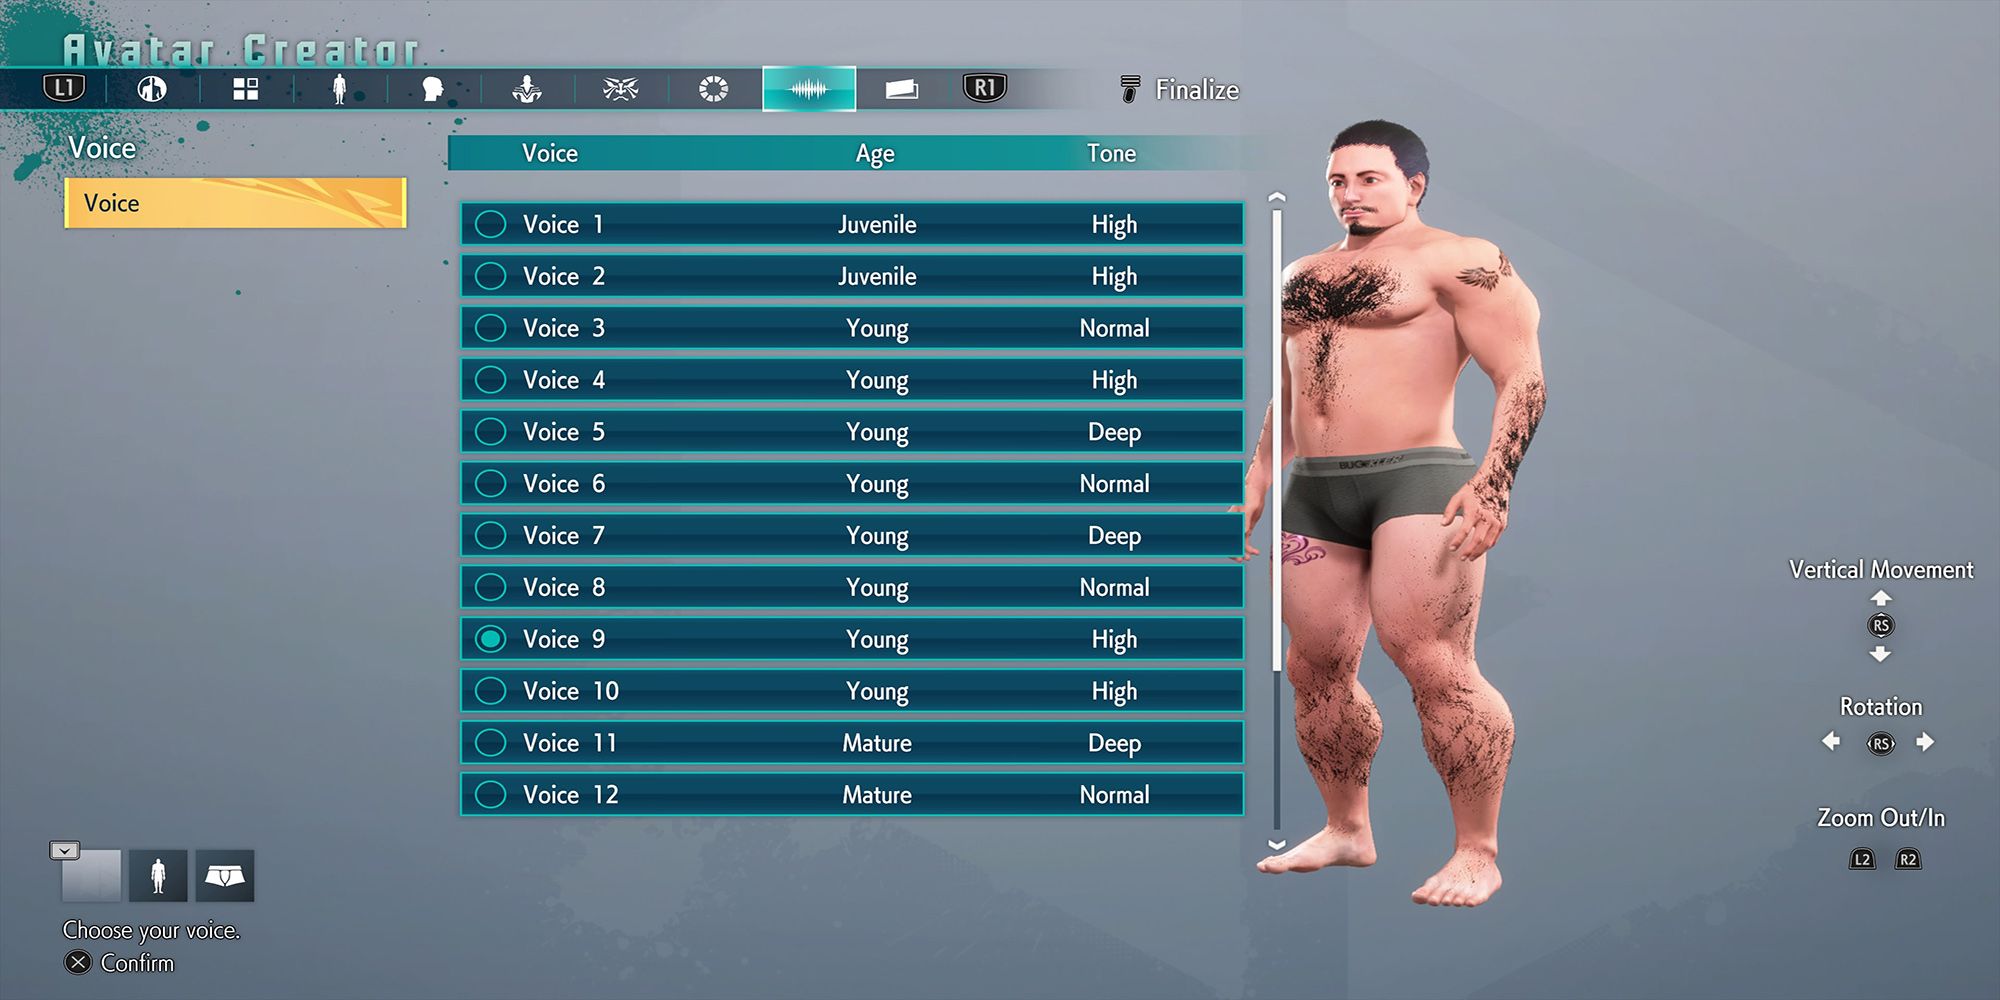 There are several voices to choose for your avatar in Street Fighter 6's Avatar Voice menu.